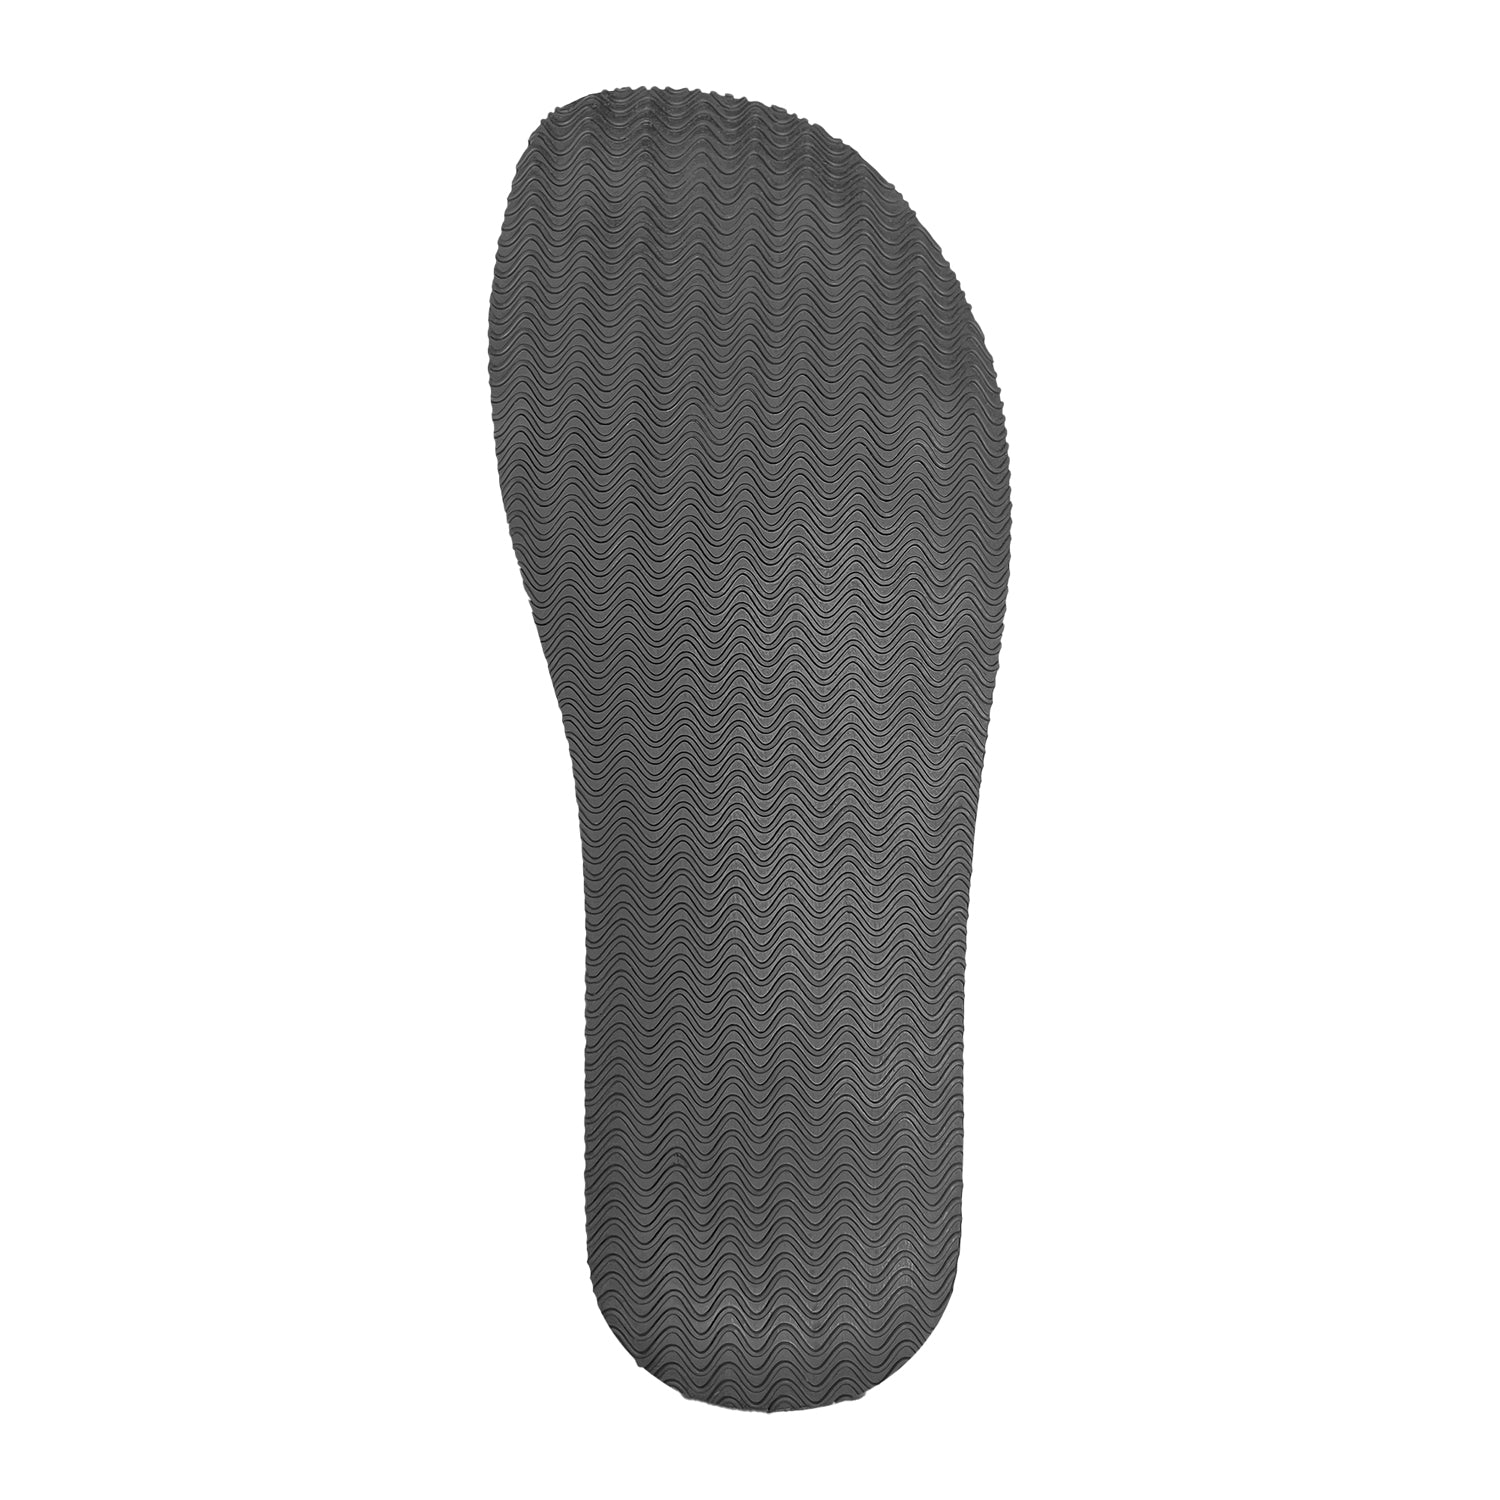 A textured rubber sole of a Bearfoot casual shoe with a detailed zigzag pattern, shown in an Ice Grey color, isolated on white.